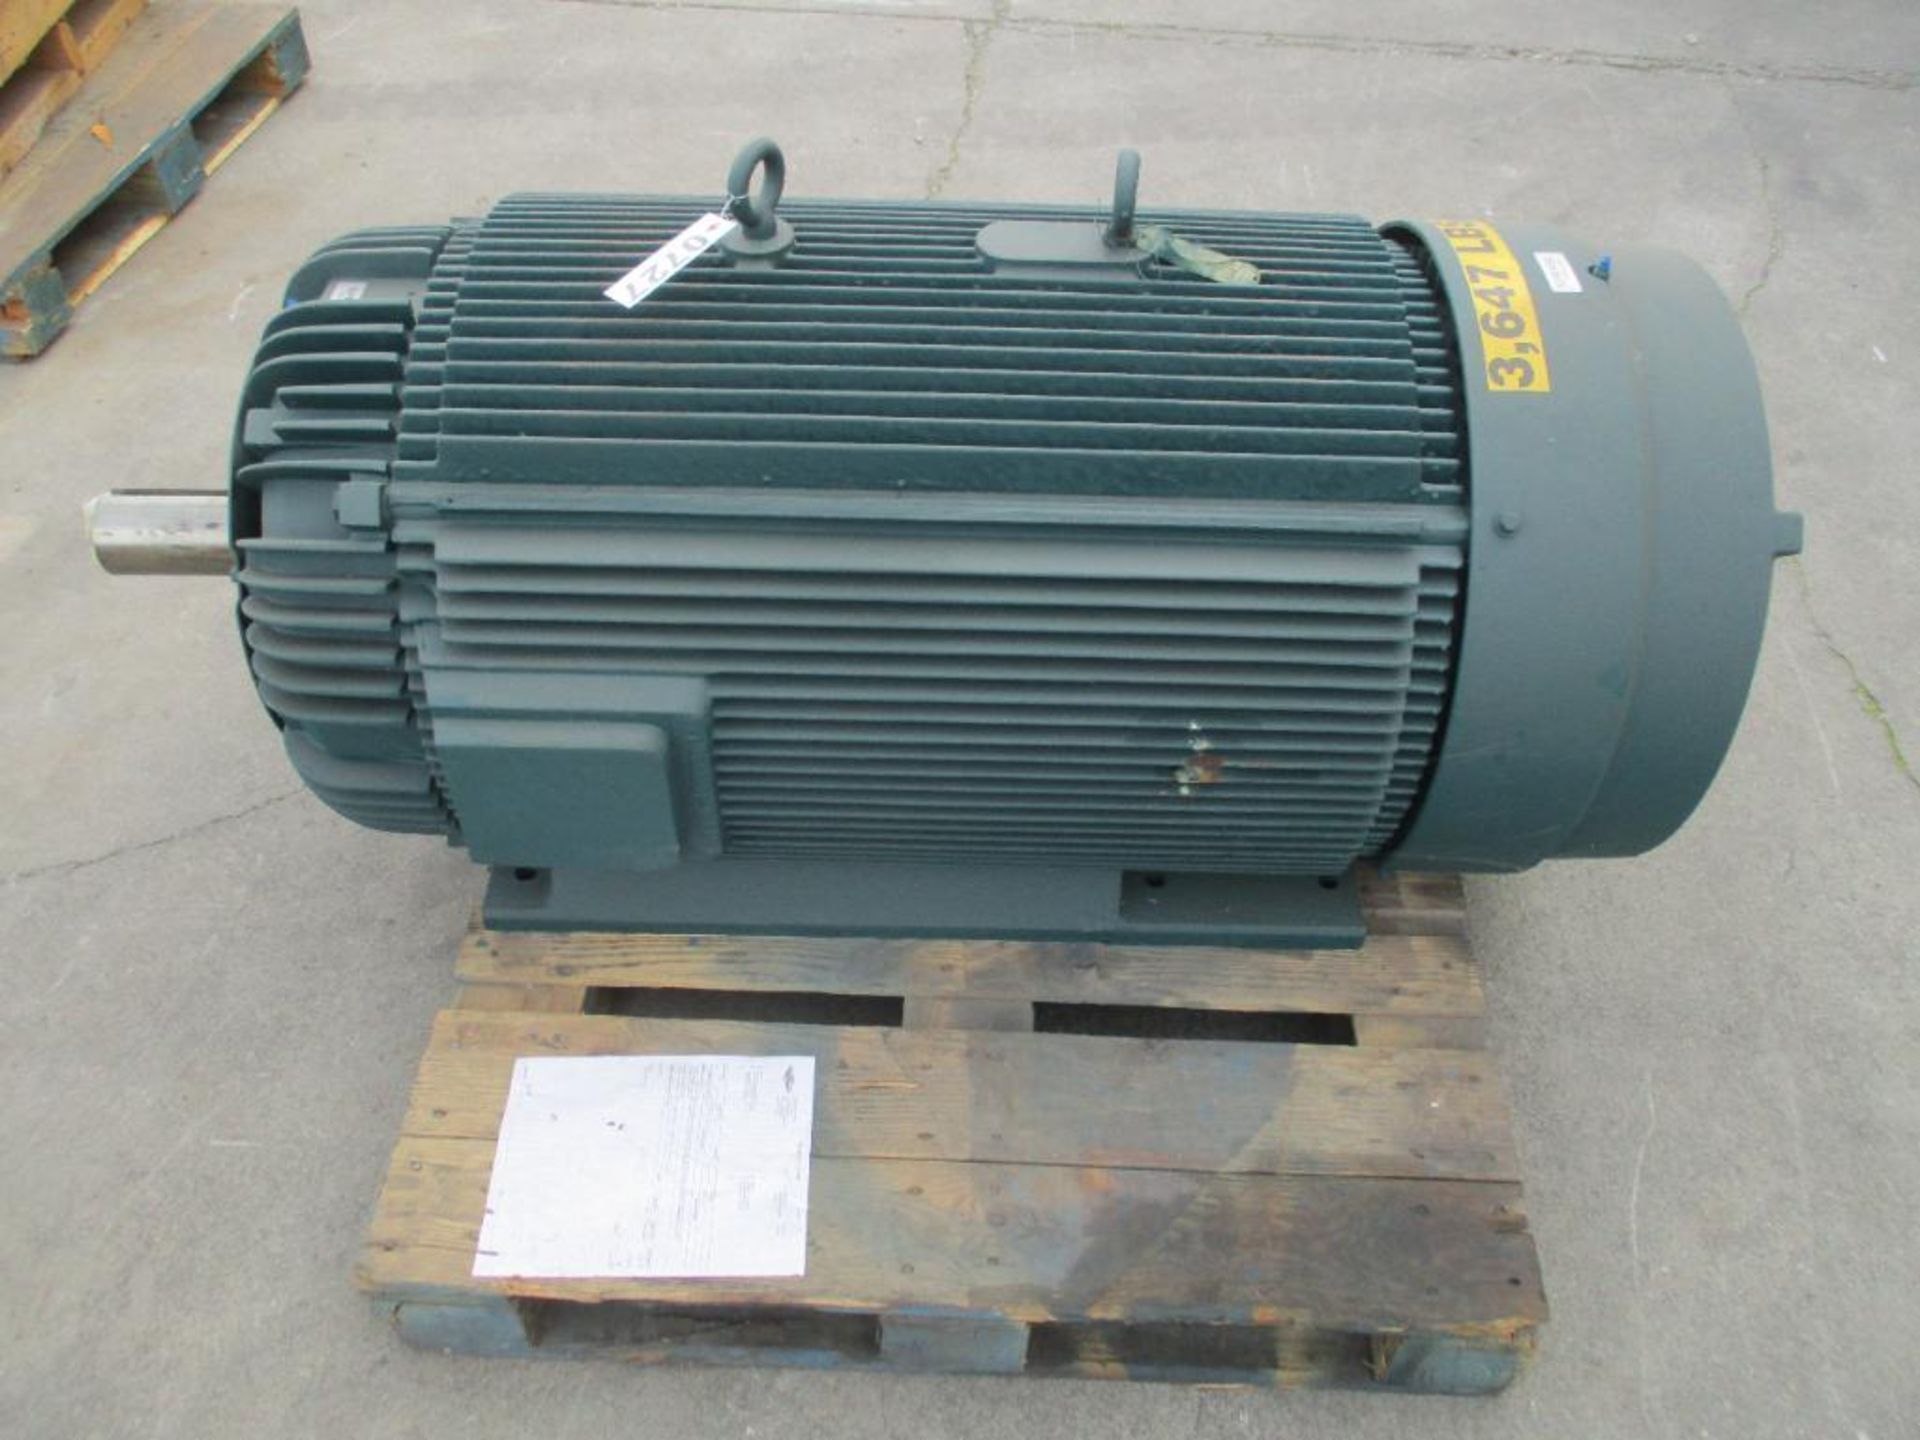 RELIANCE ELECTRIC 3 PHASE 400HP 1791-2686RPM 449T FRAME A/C MOTOR P/N 6304757 3602# LBS (THIS LOT IS - Bild 3 aus 5